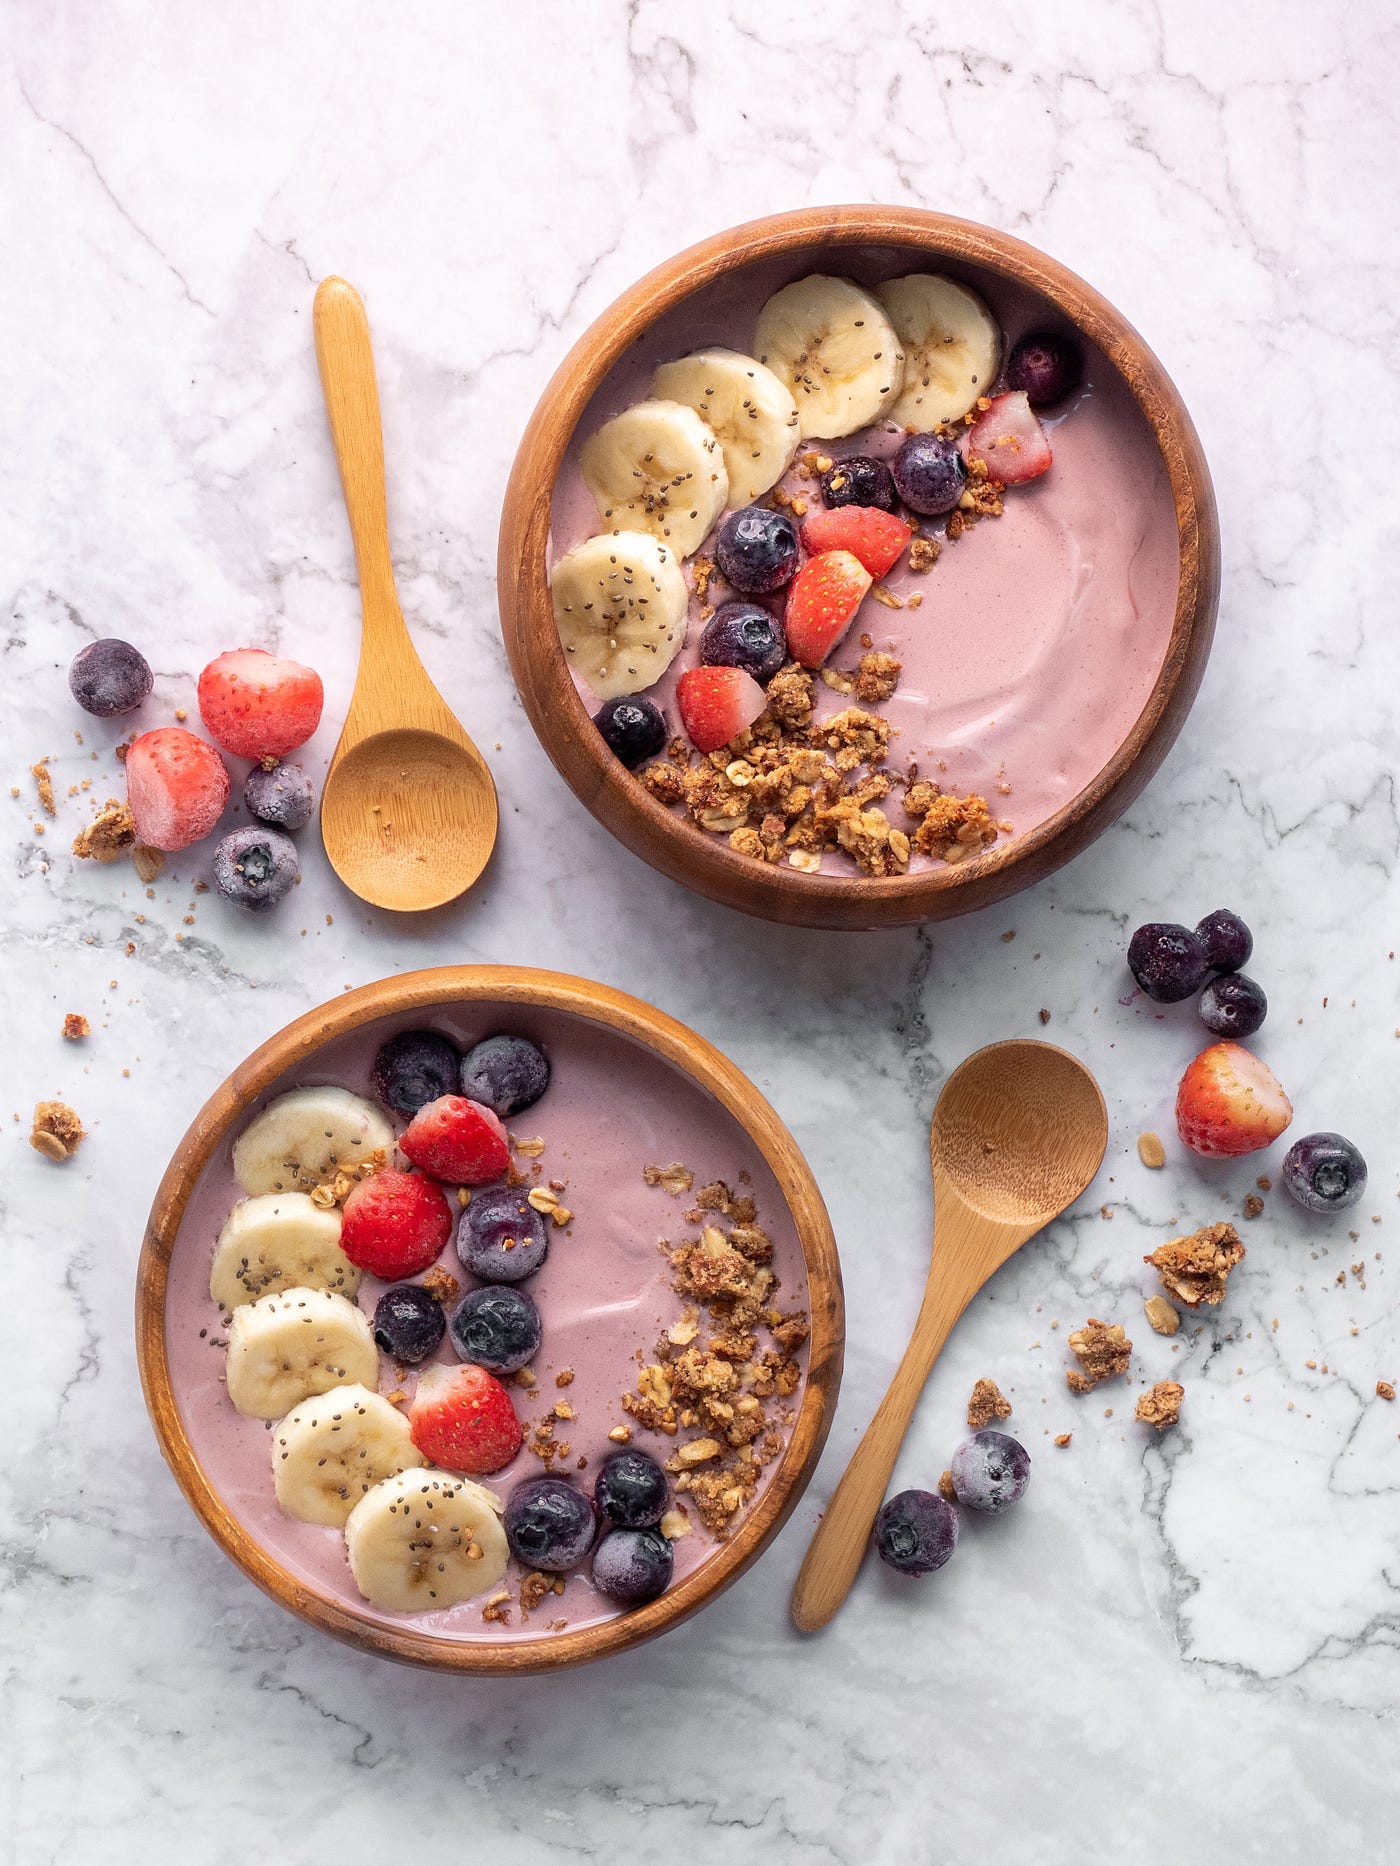 Two bowls of yogurt, with banana slices, raspberries, and blueberries. The yogurt is pink and we see it all from above. There are two wooden spoons, one next to each bowl.